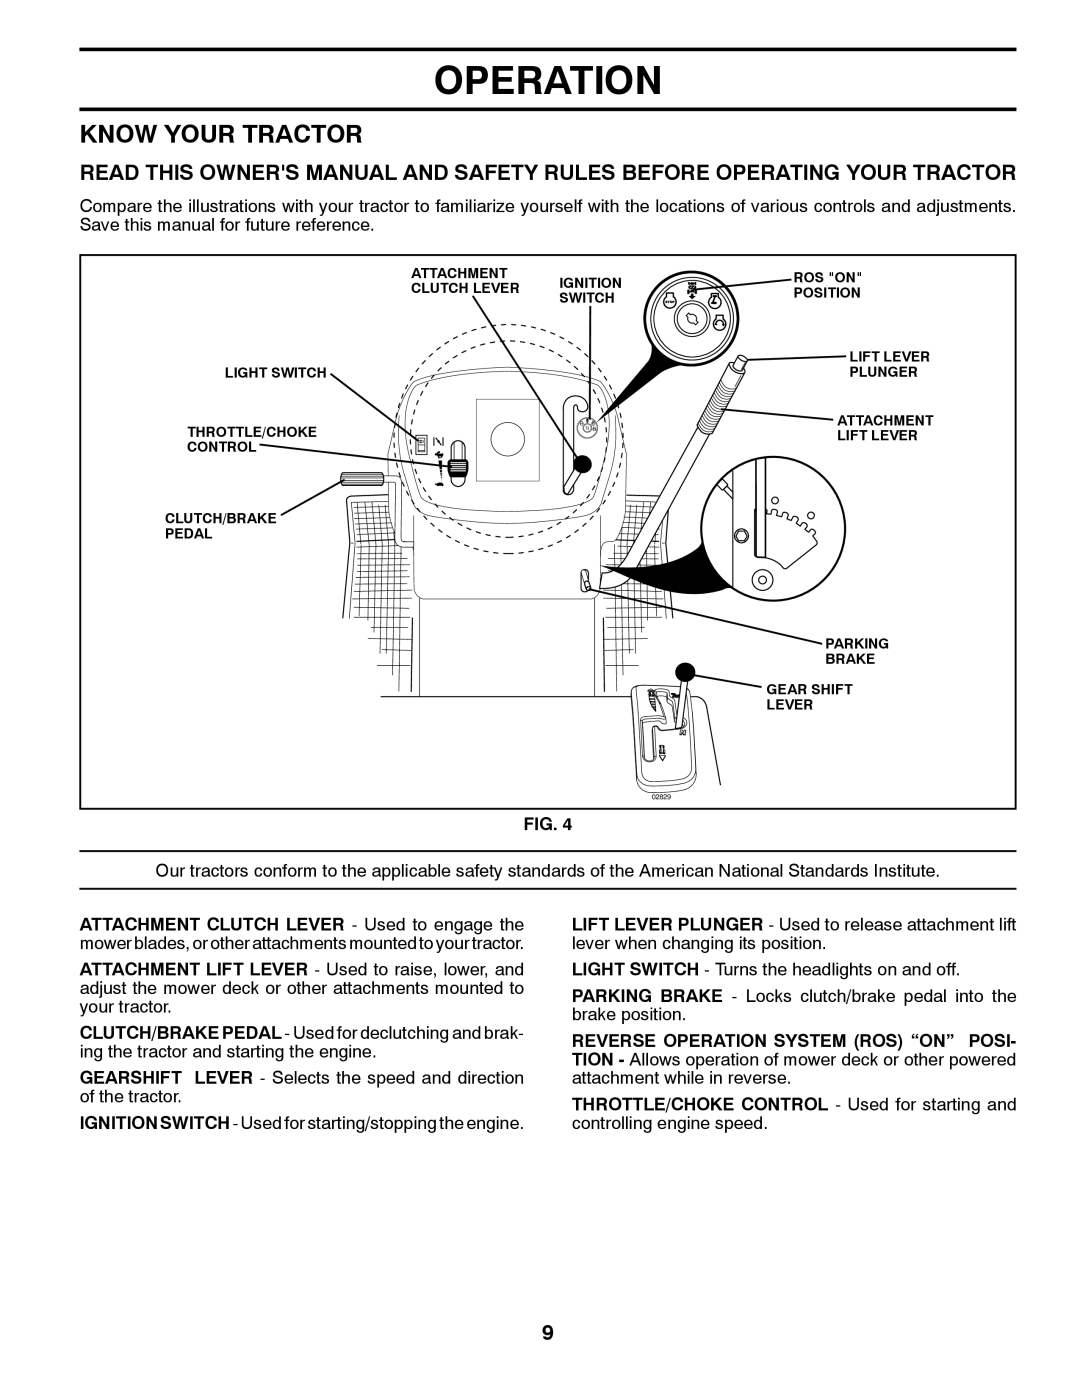 Poulan 424368 manual Know Your Tractor, Operation 